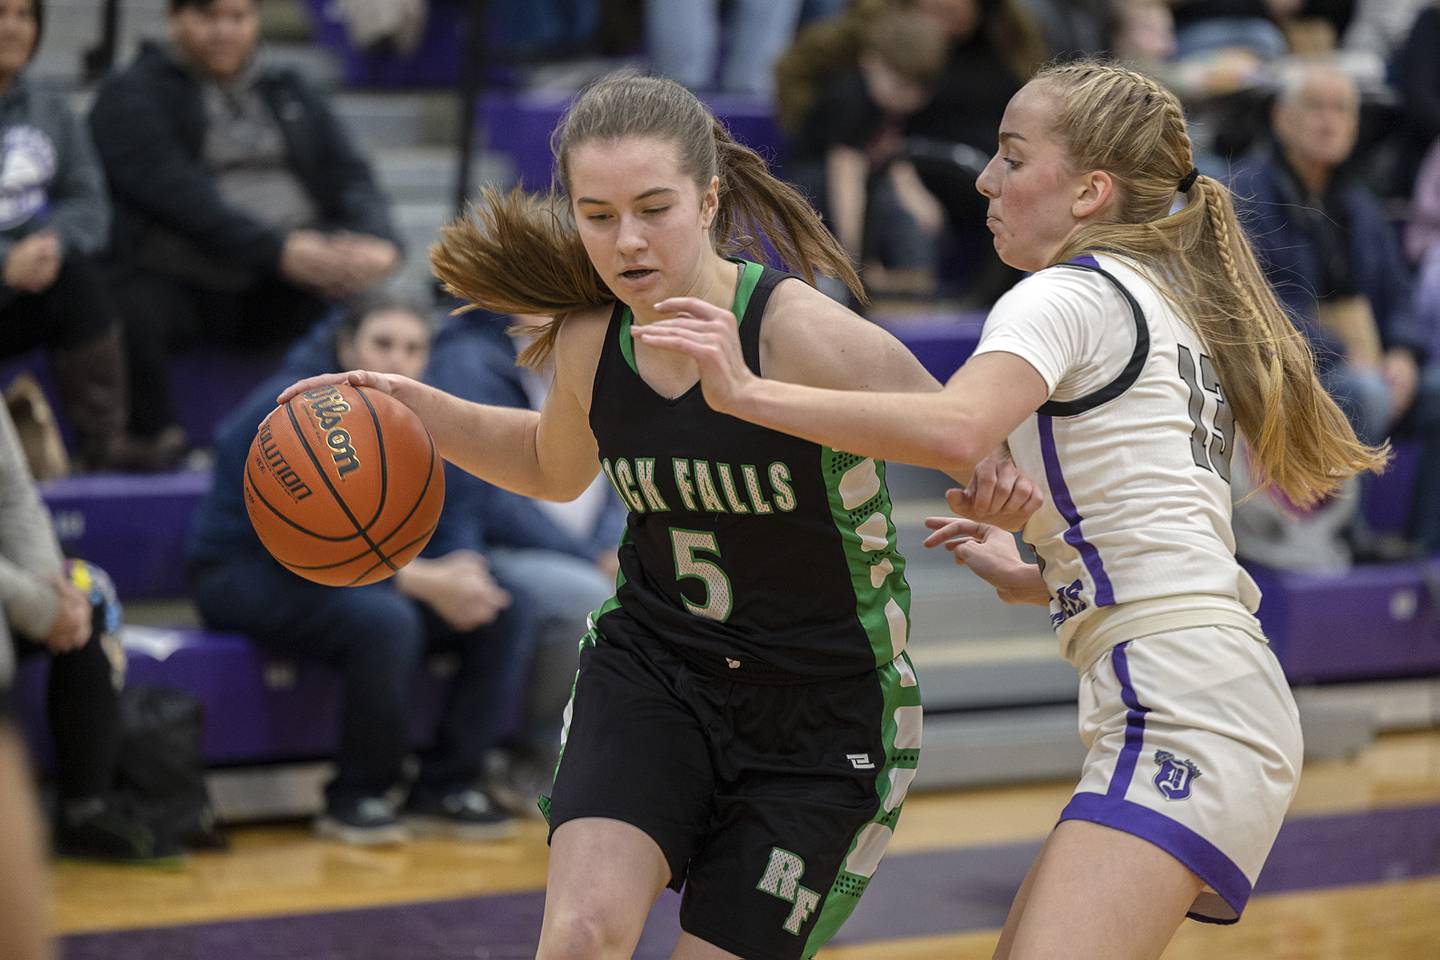 Rock Falls’ Rylee Johnson drives to the hoop against Dixon’s Kait Knipple Wednesday, Feb. 1, 2023.